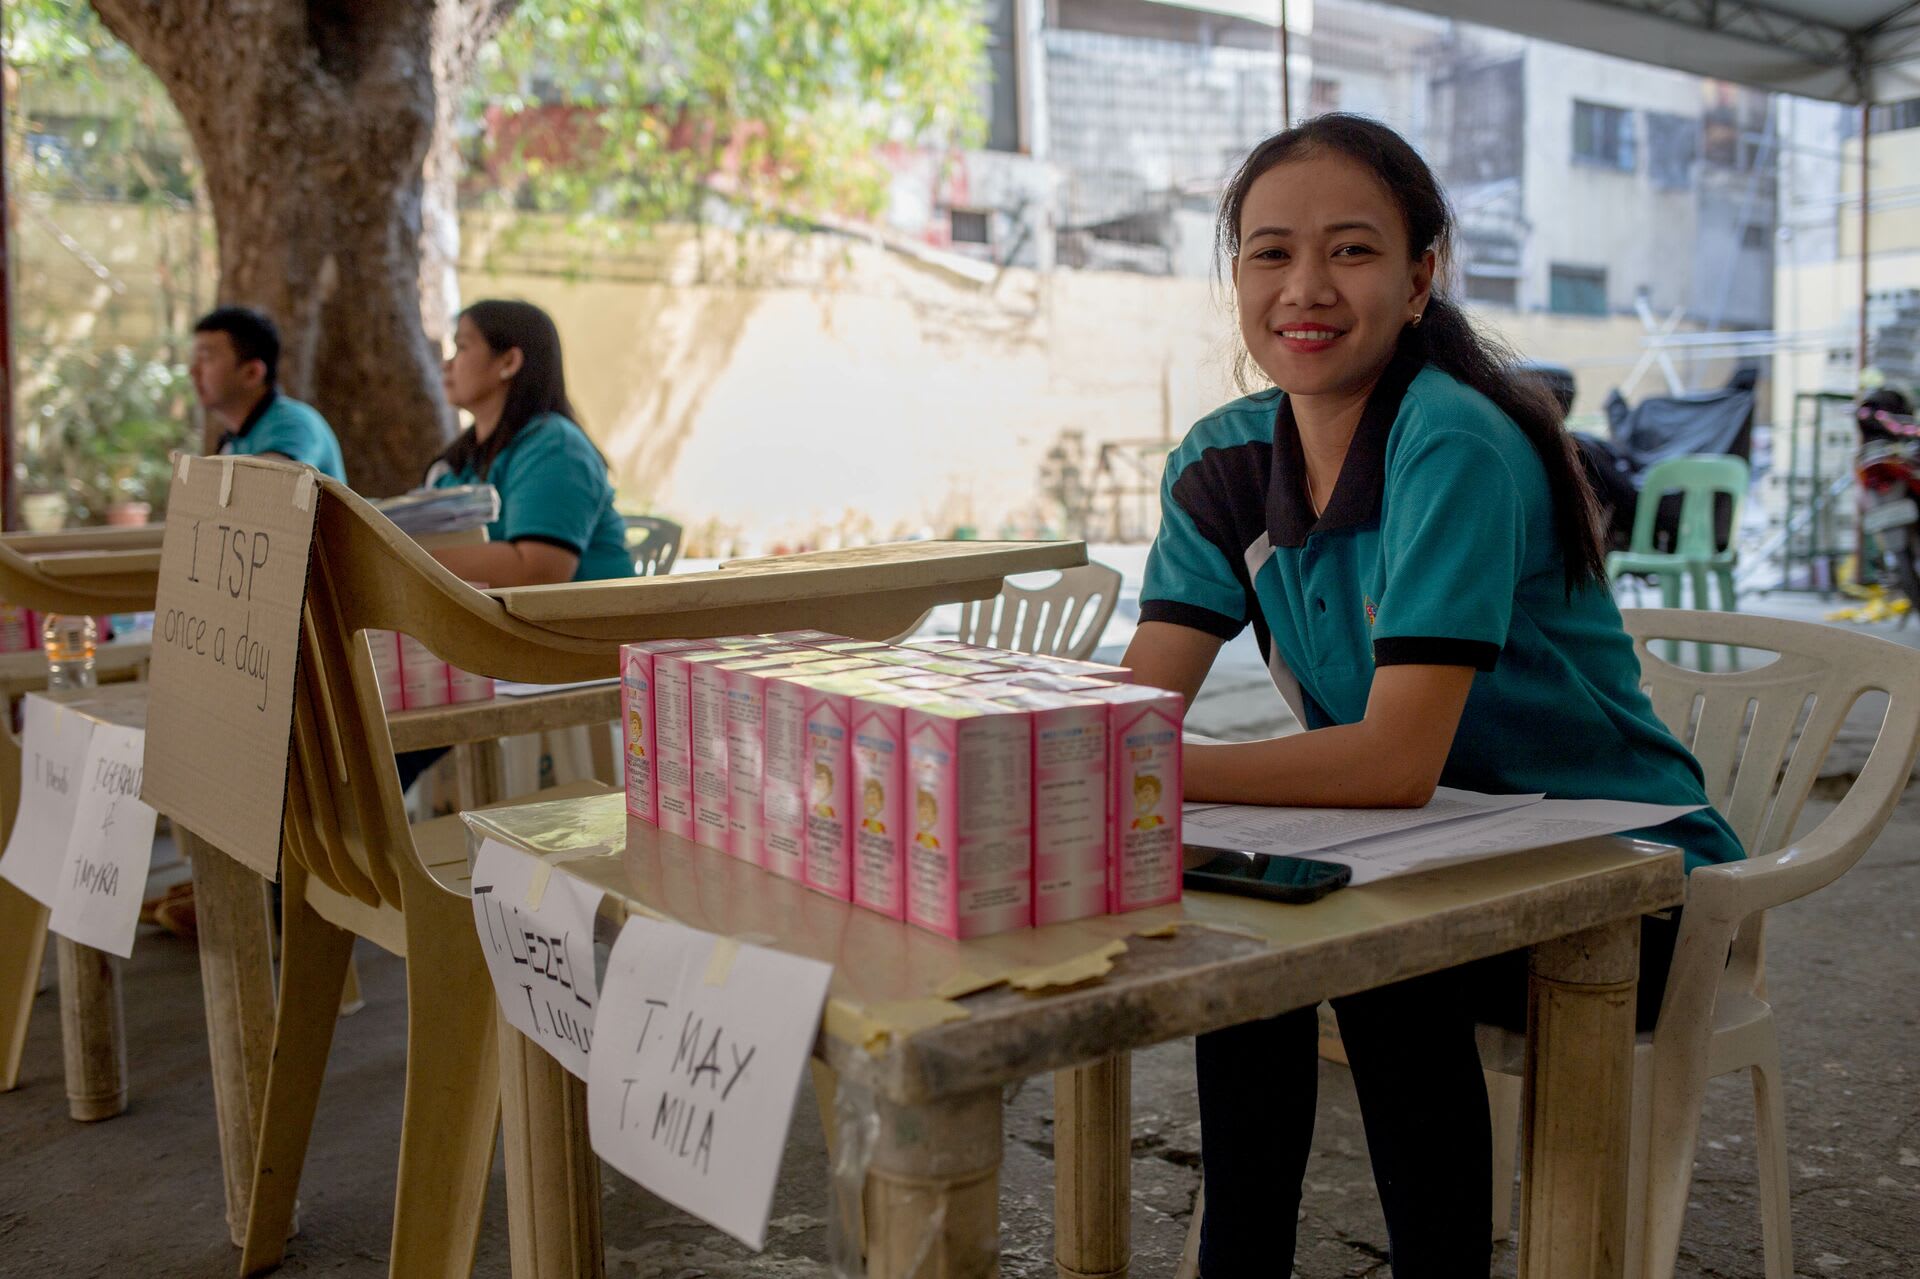 A Compassion Centre staff member sits at a table with packs of vitamins in front of her, ready to distribute to Compassion-assisted families.